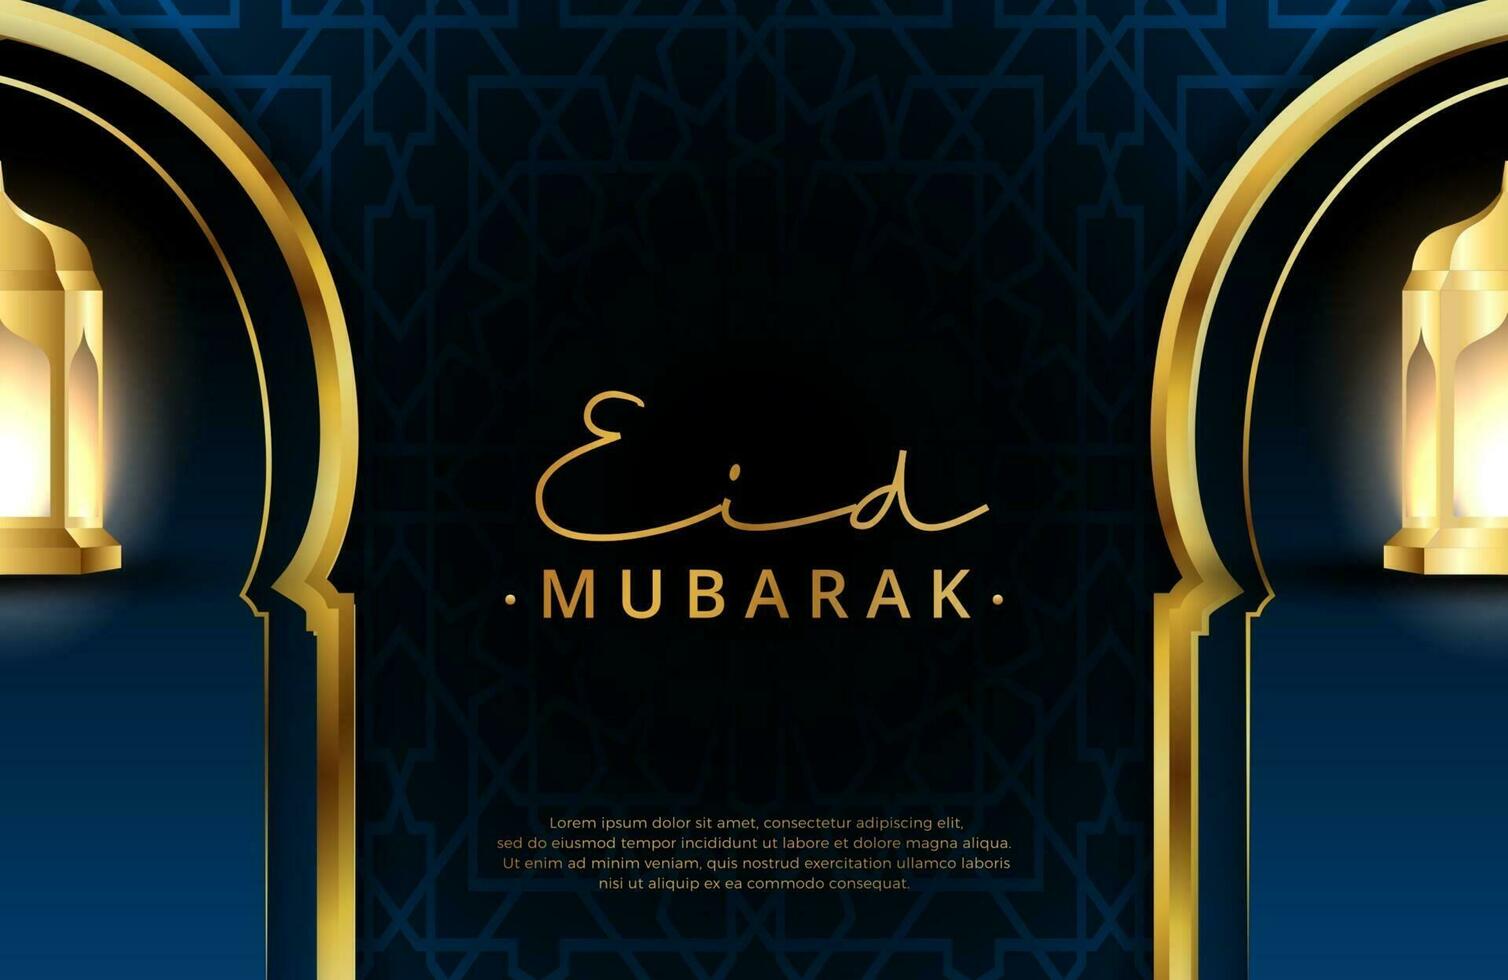 Eid mubarak background in luxury style Vector illustration of dark green islamic design with gold lantern and crescent moon for Islamic holy month celebrations